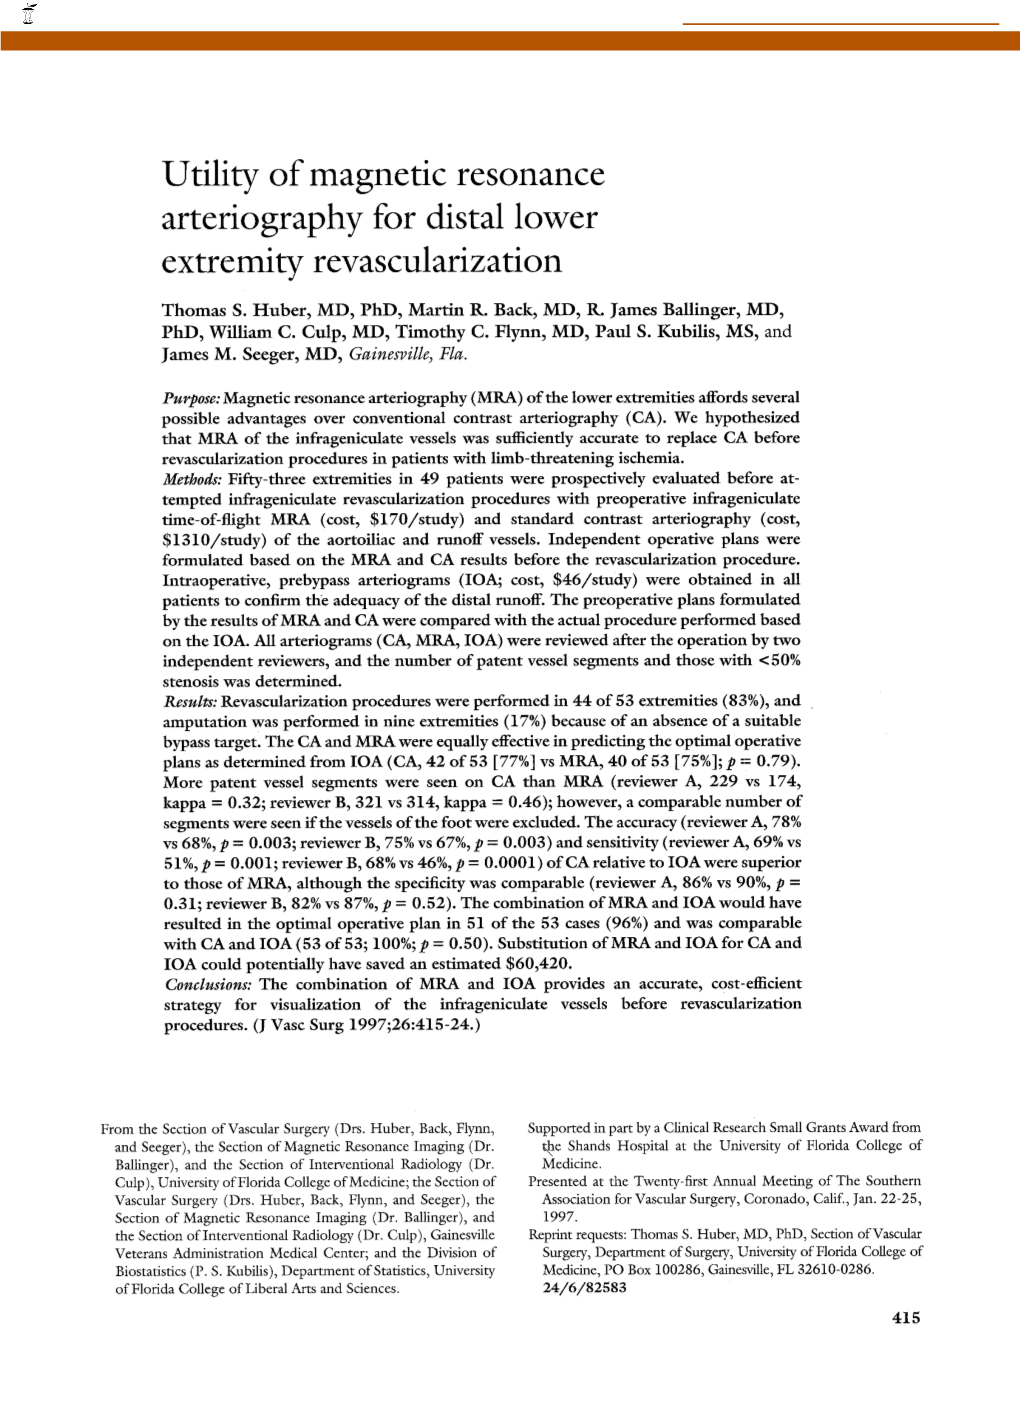 Utility of Magnetic Resonance Arteriography for Distal Lower Extremity Revascularization